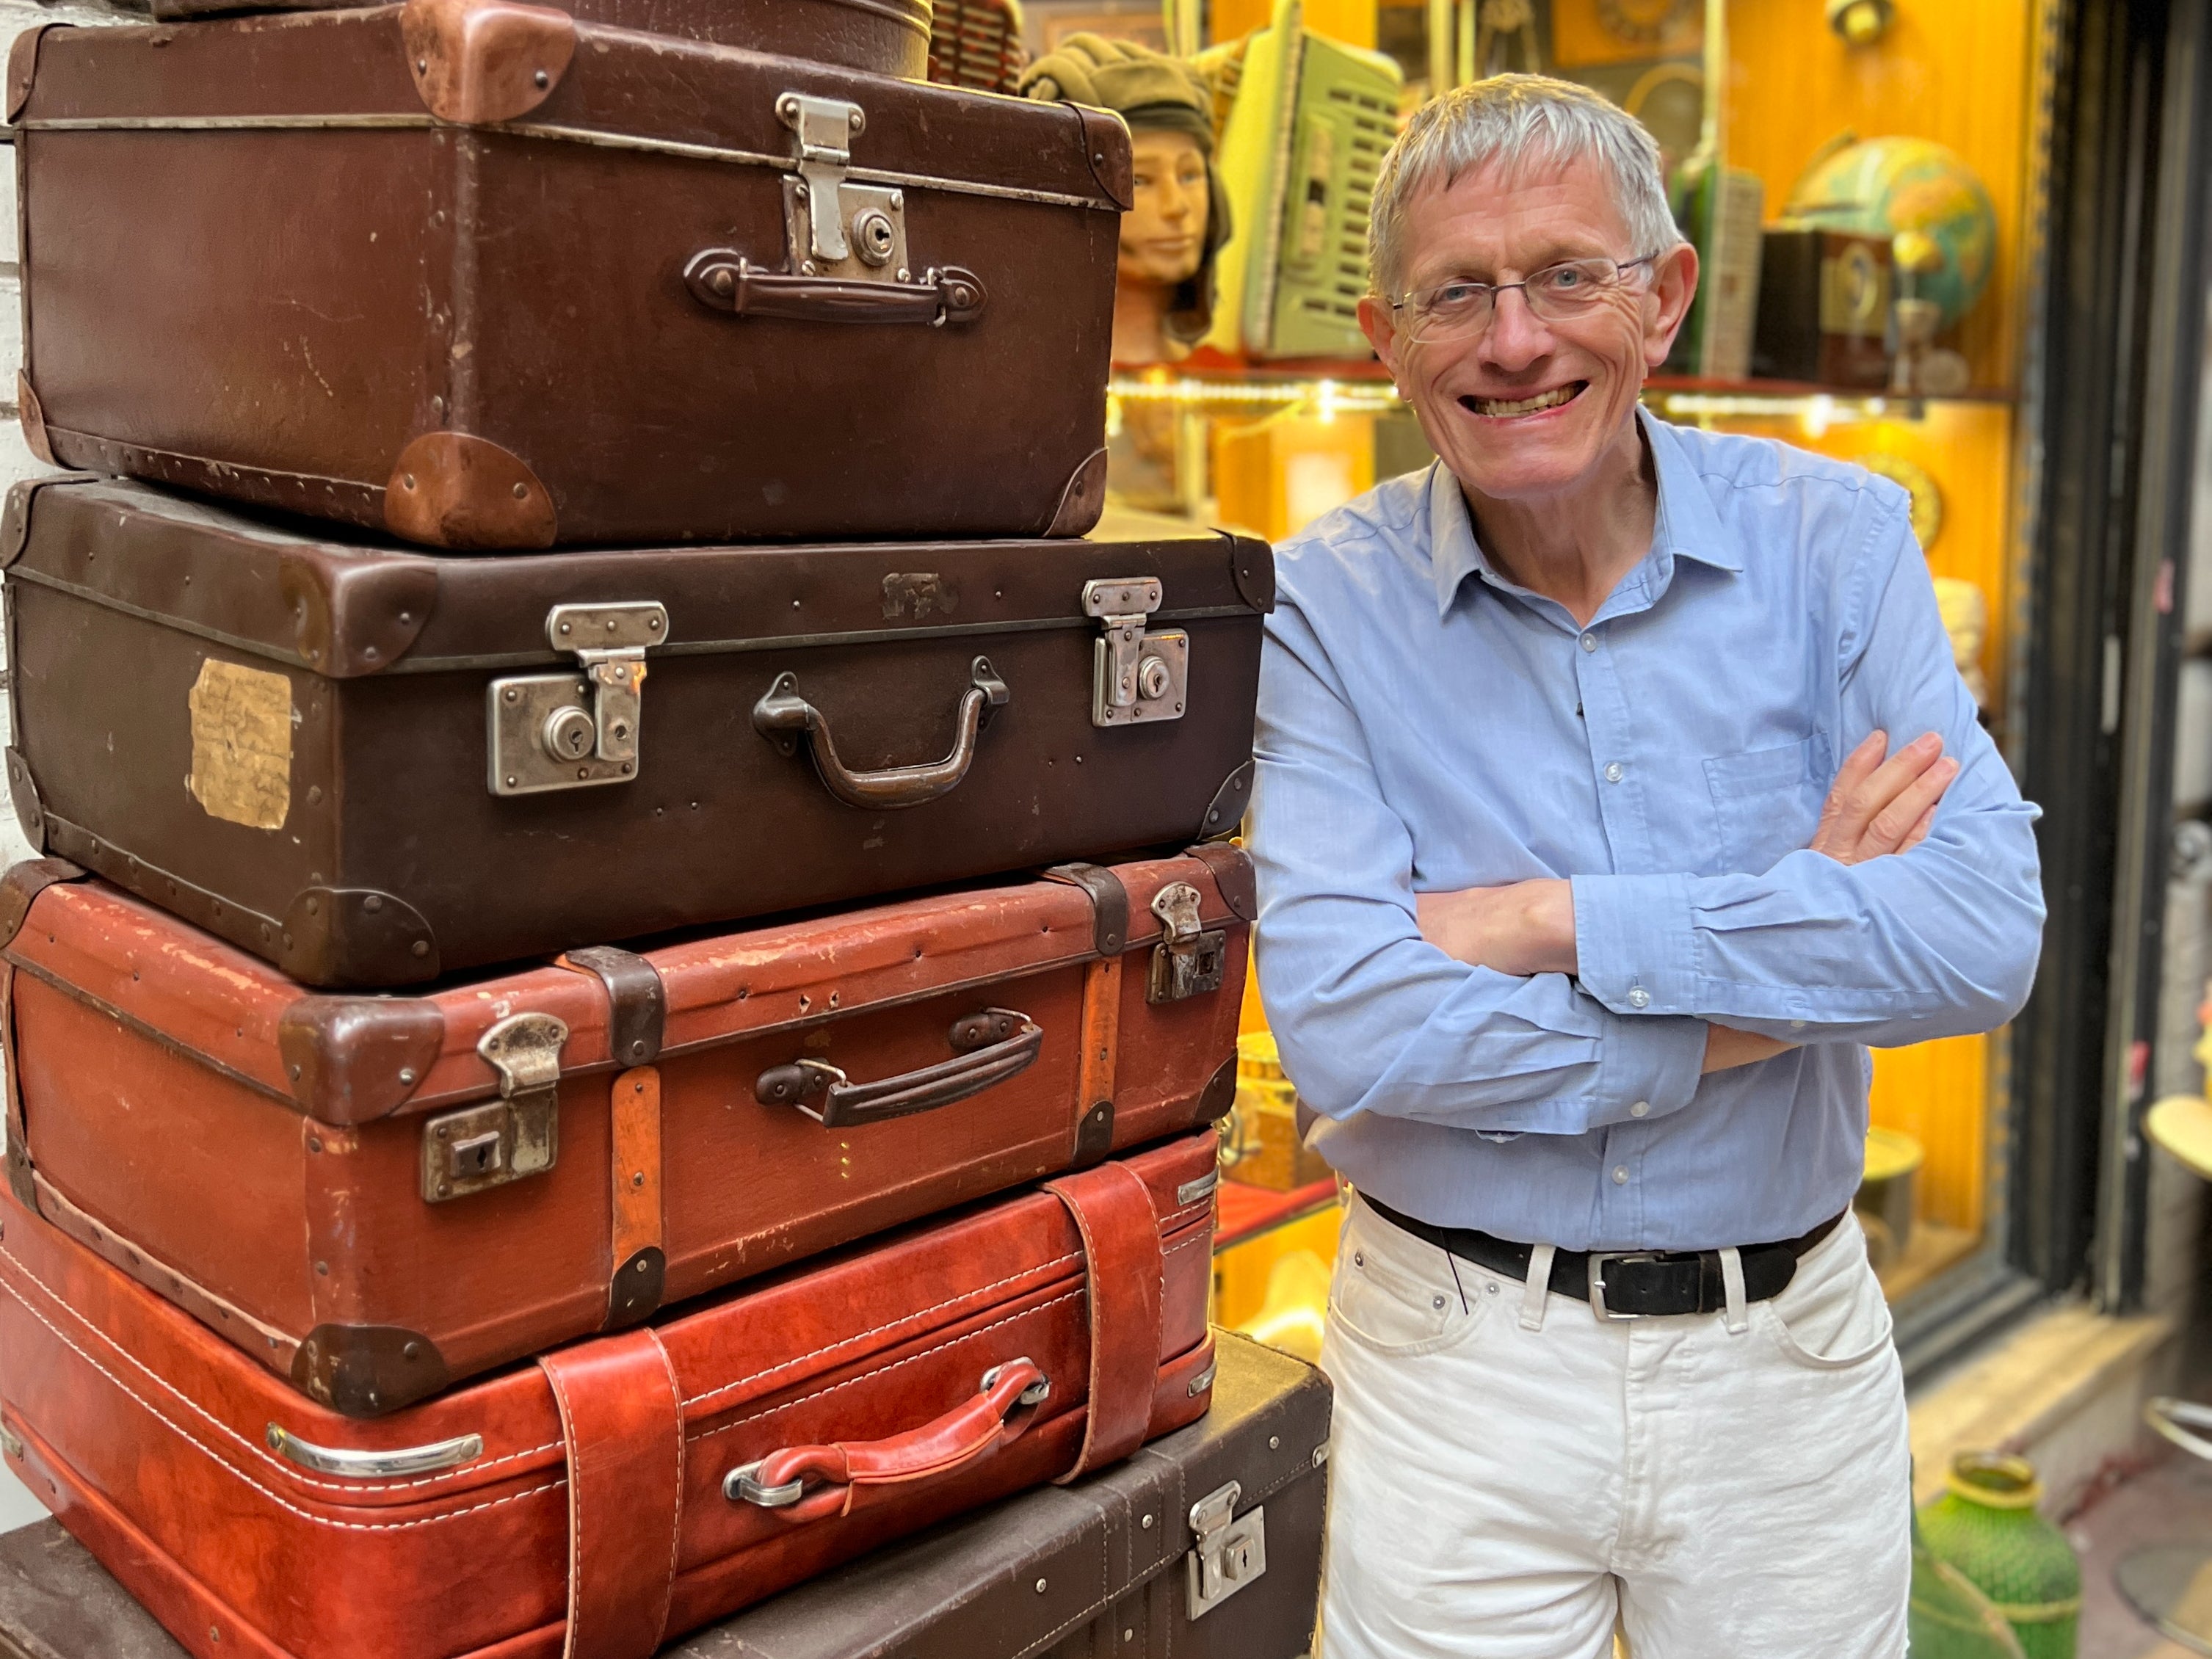 Travelling light: cabin baggage only is the way to go